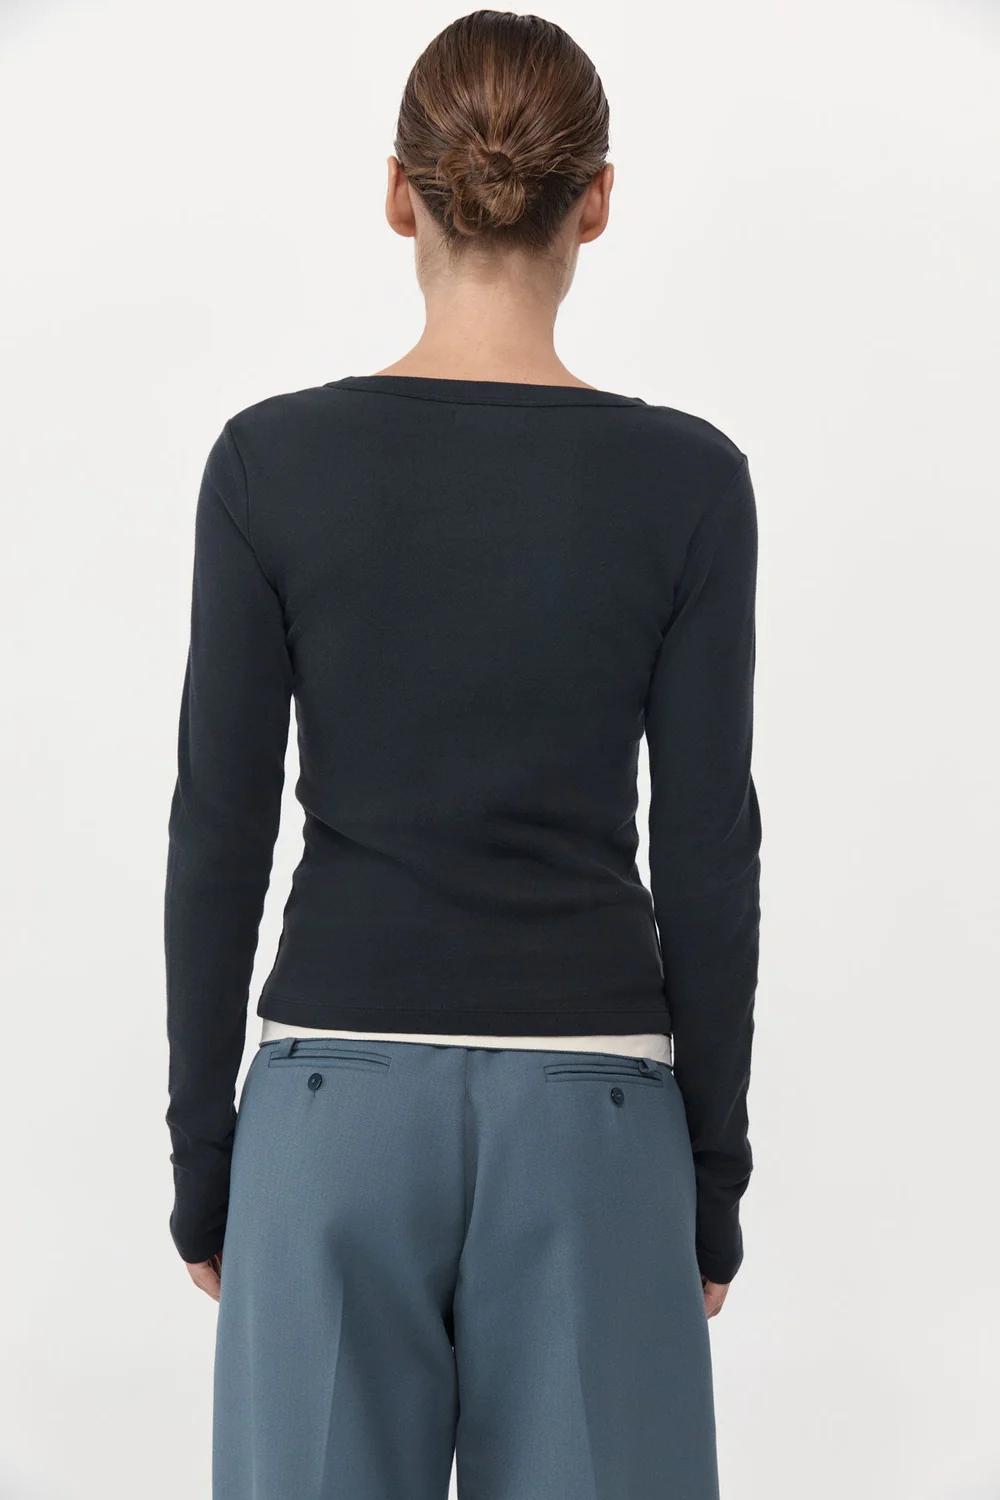 Product Image for Organic Cotton Long Sleeve Top, Black